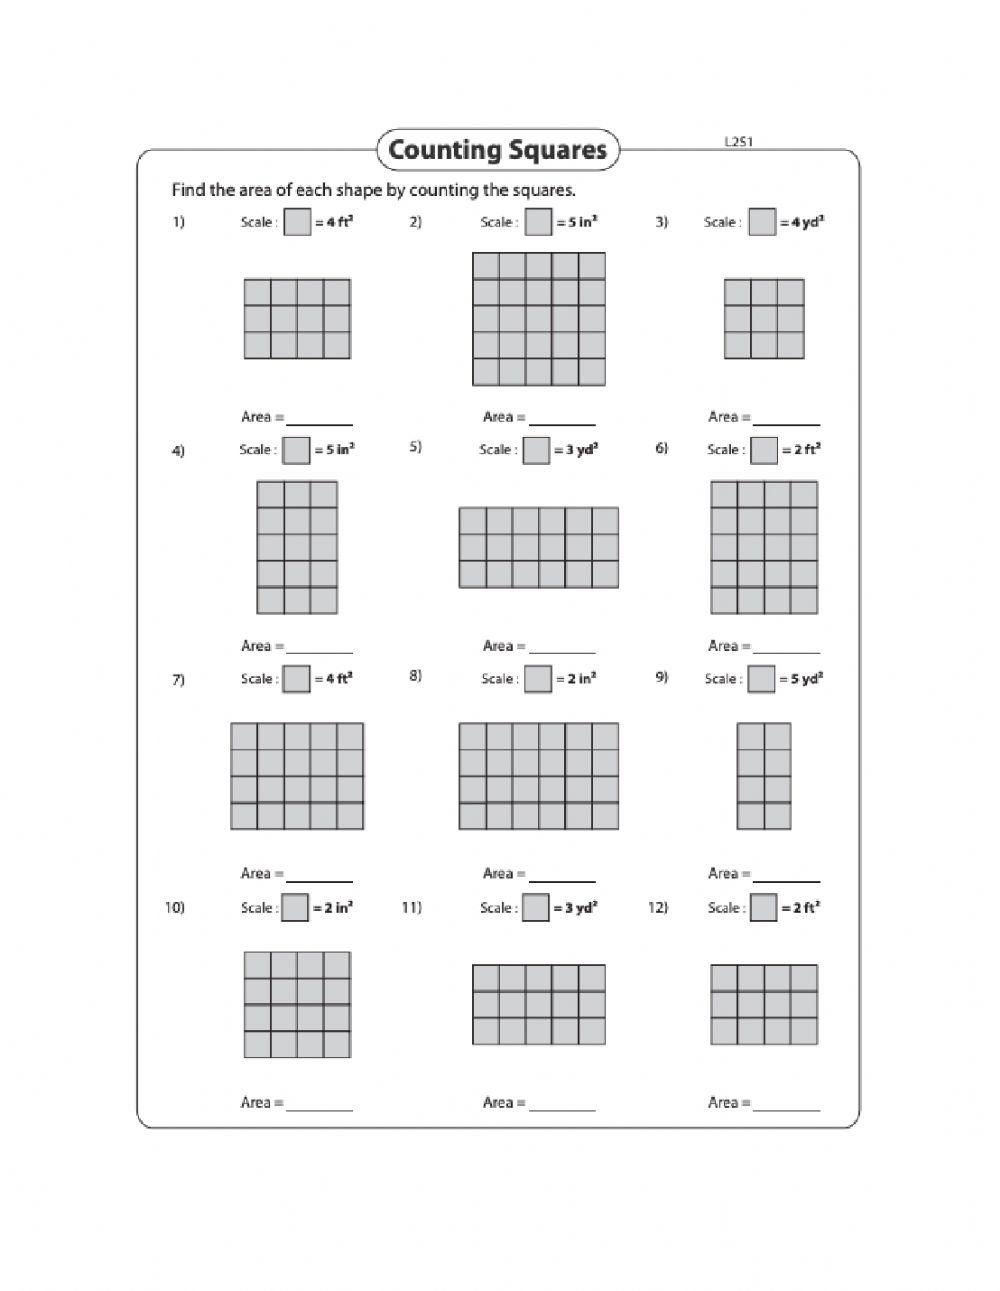 Area - Counting squares using a scale Day 3 Level 2